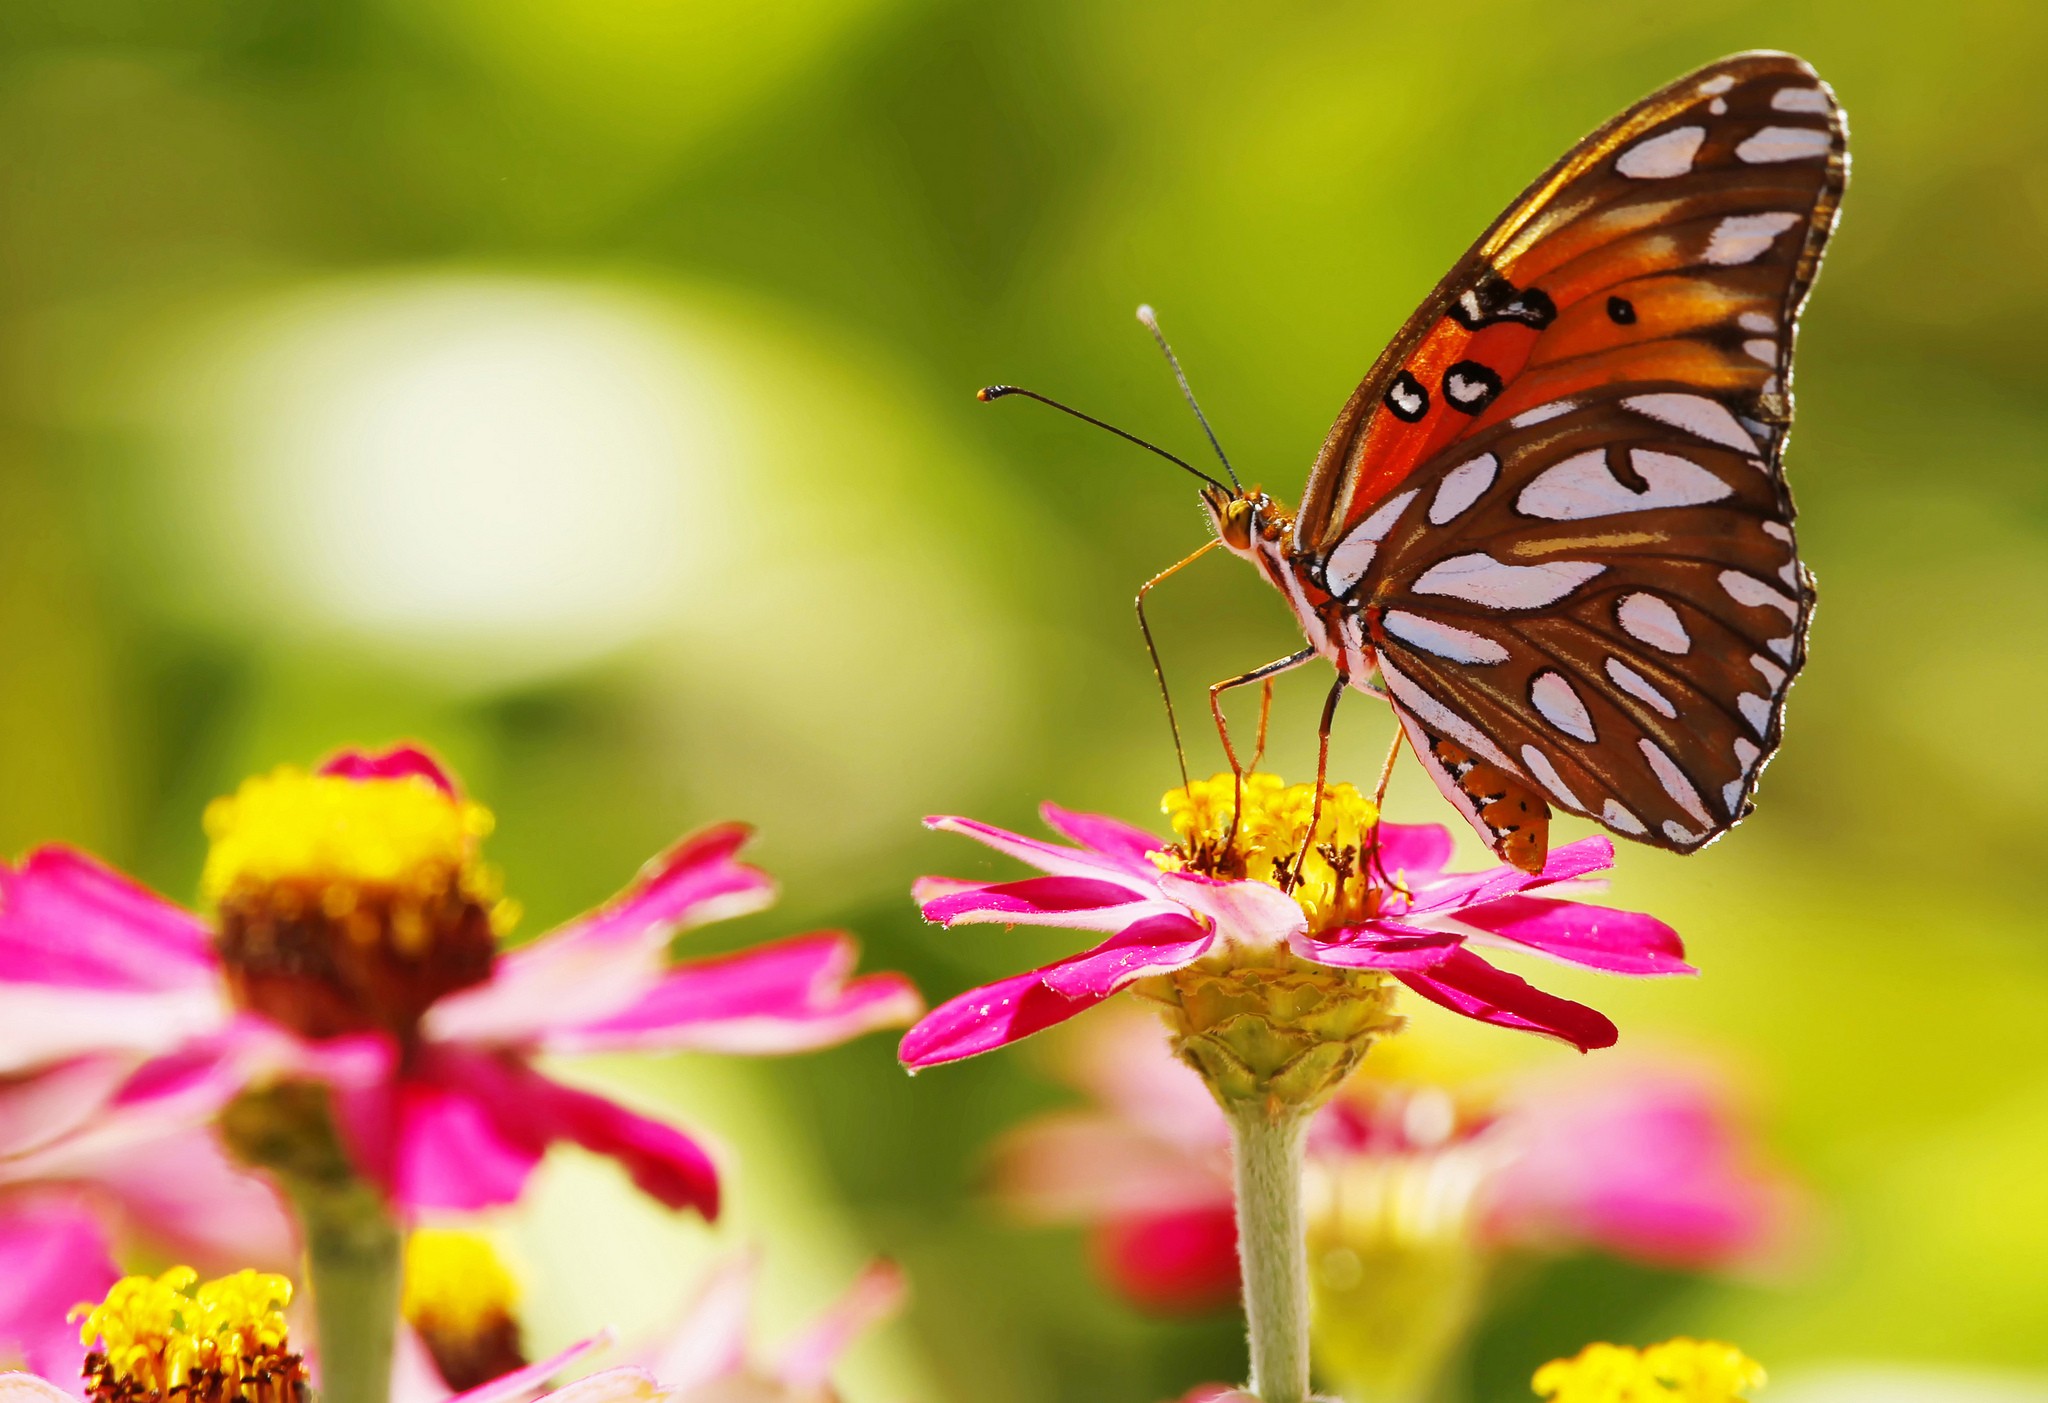 Wallpapers animales depth of field florals on the desktop